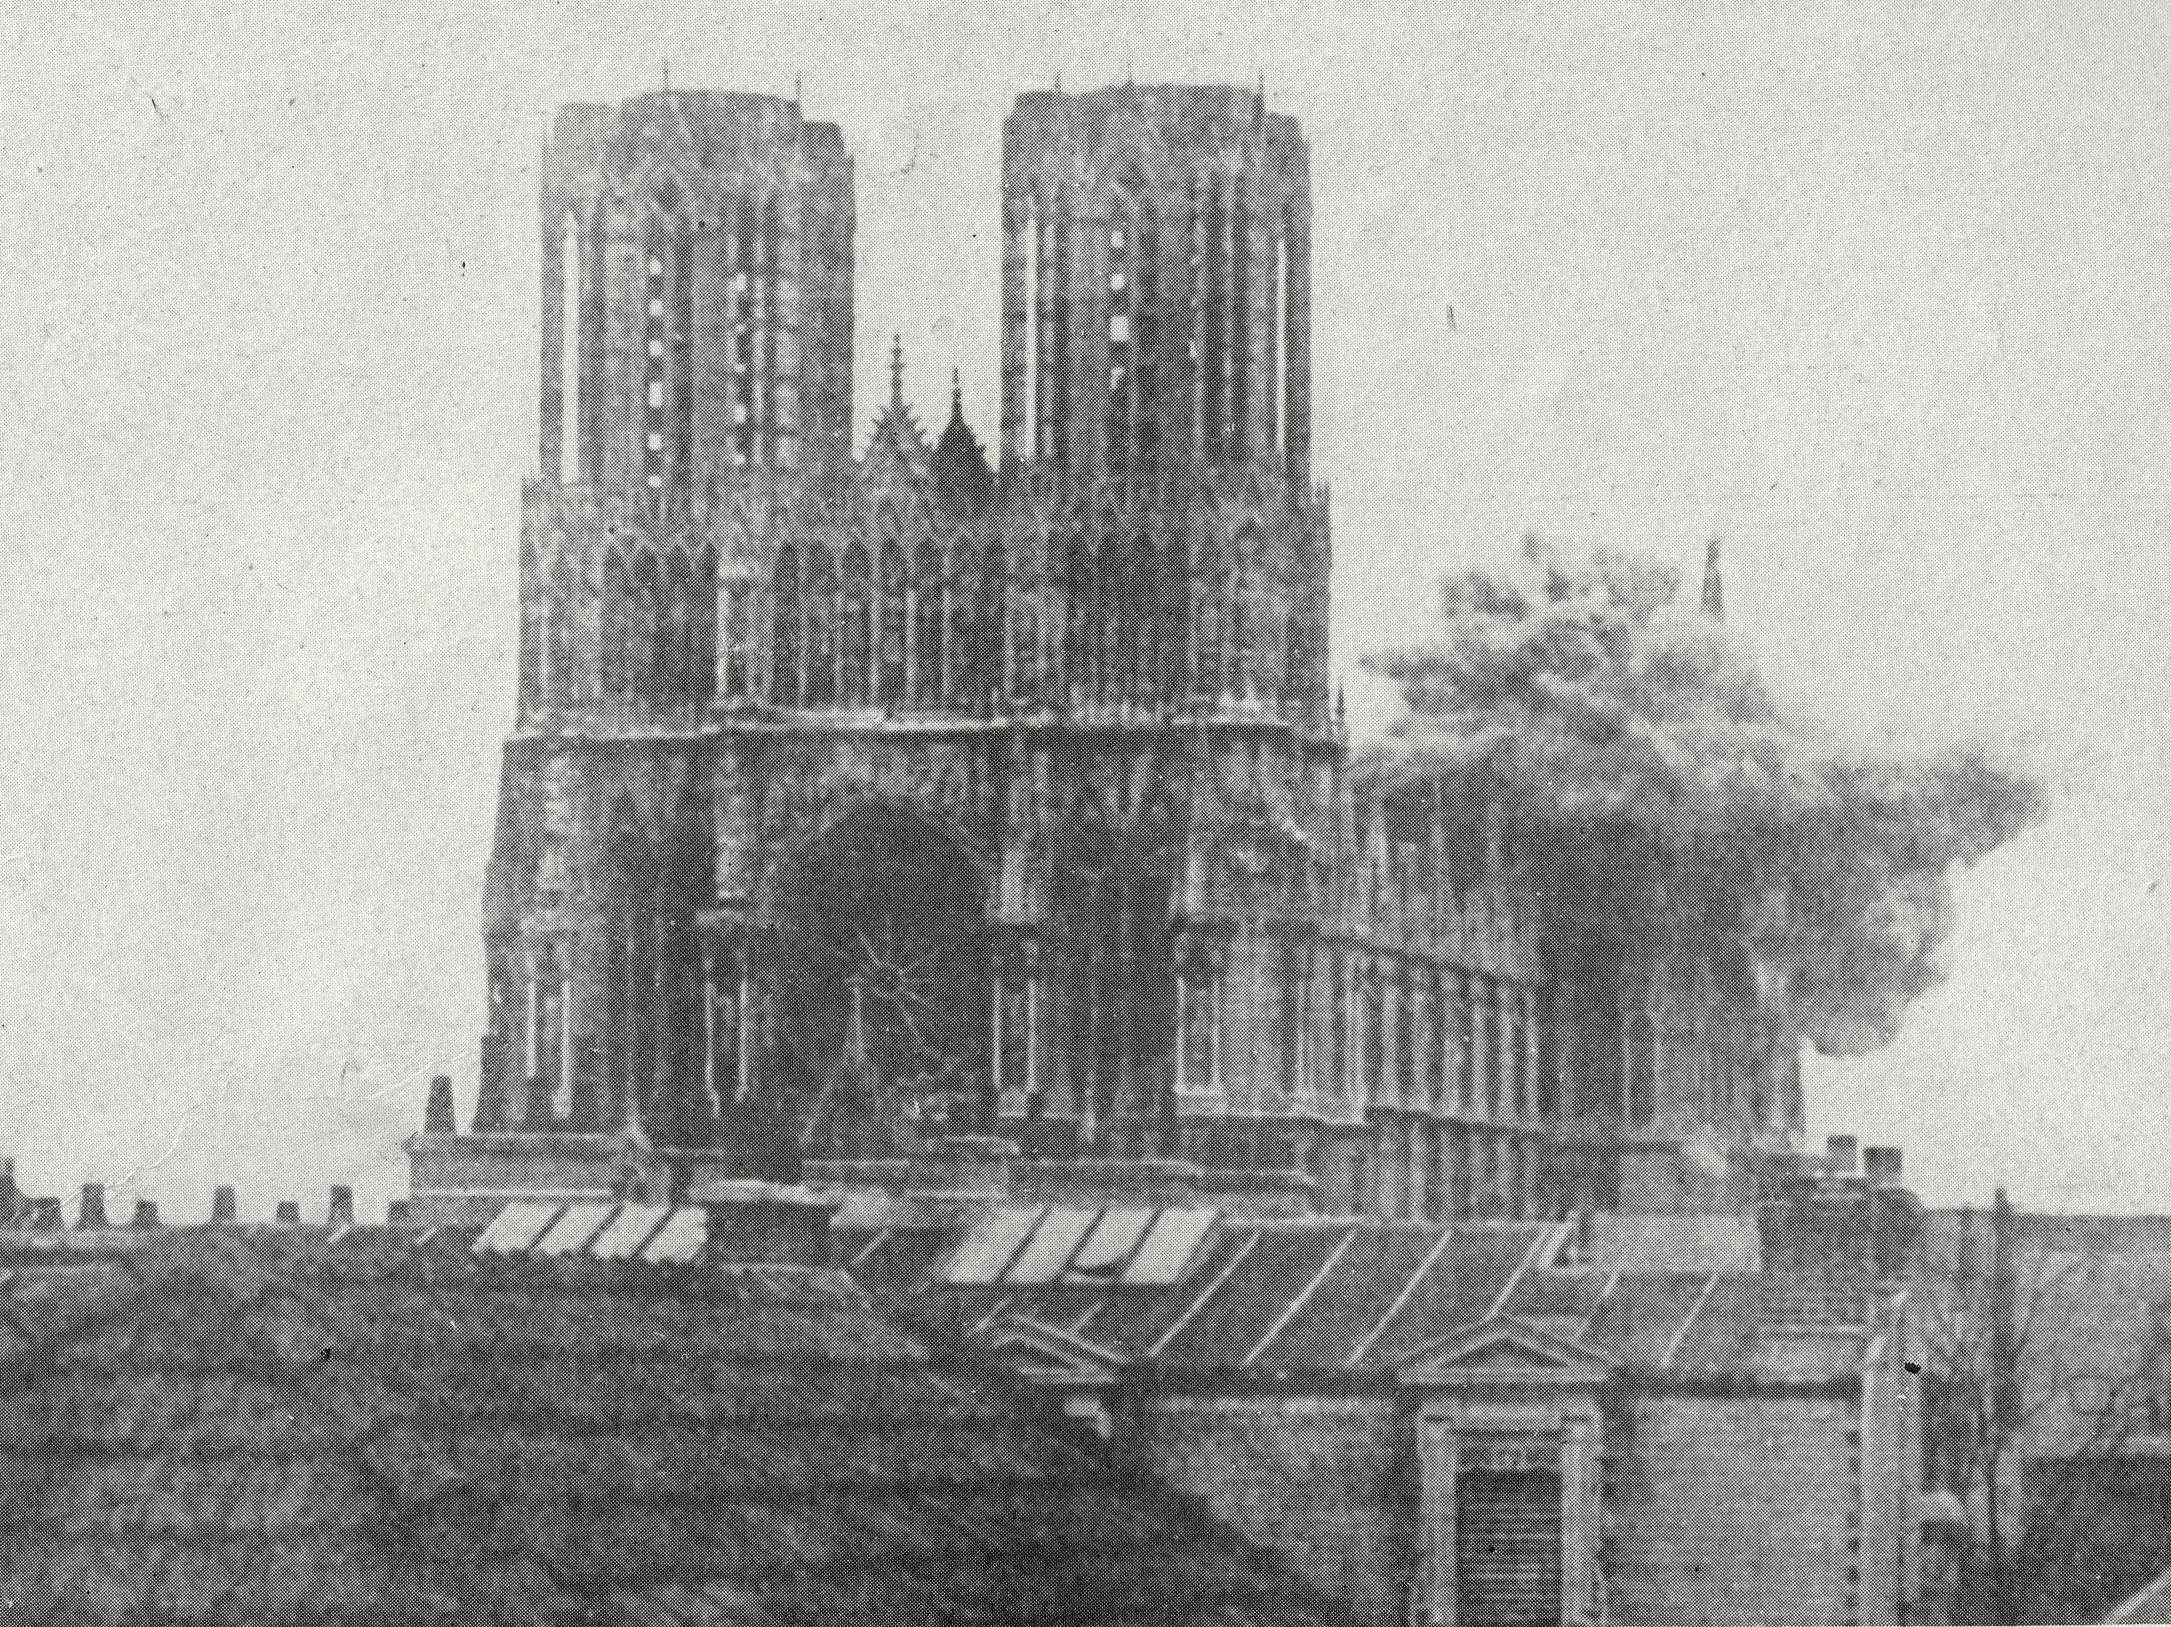 Bombshell hiting Reims Cathedral during WWI